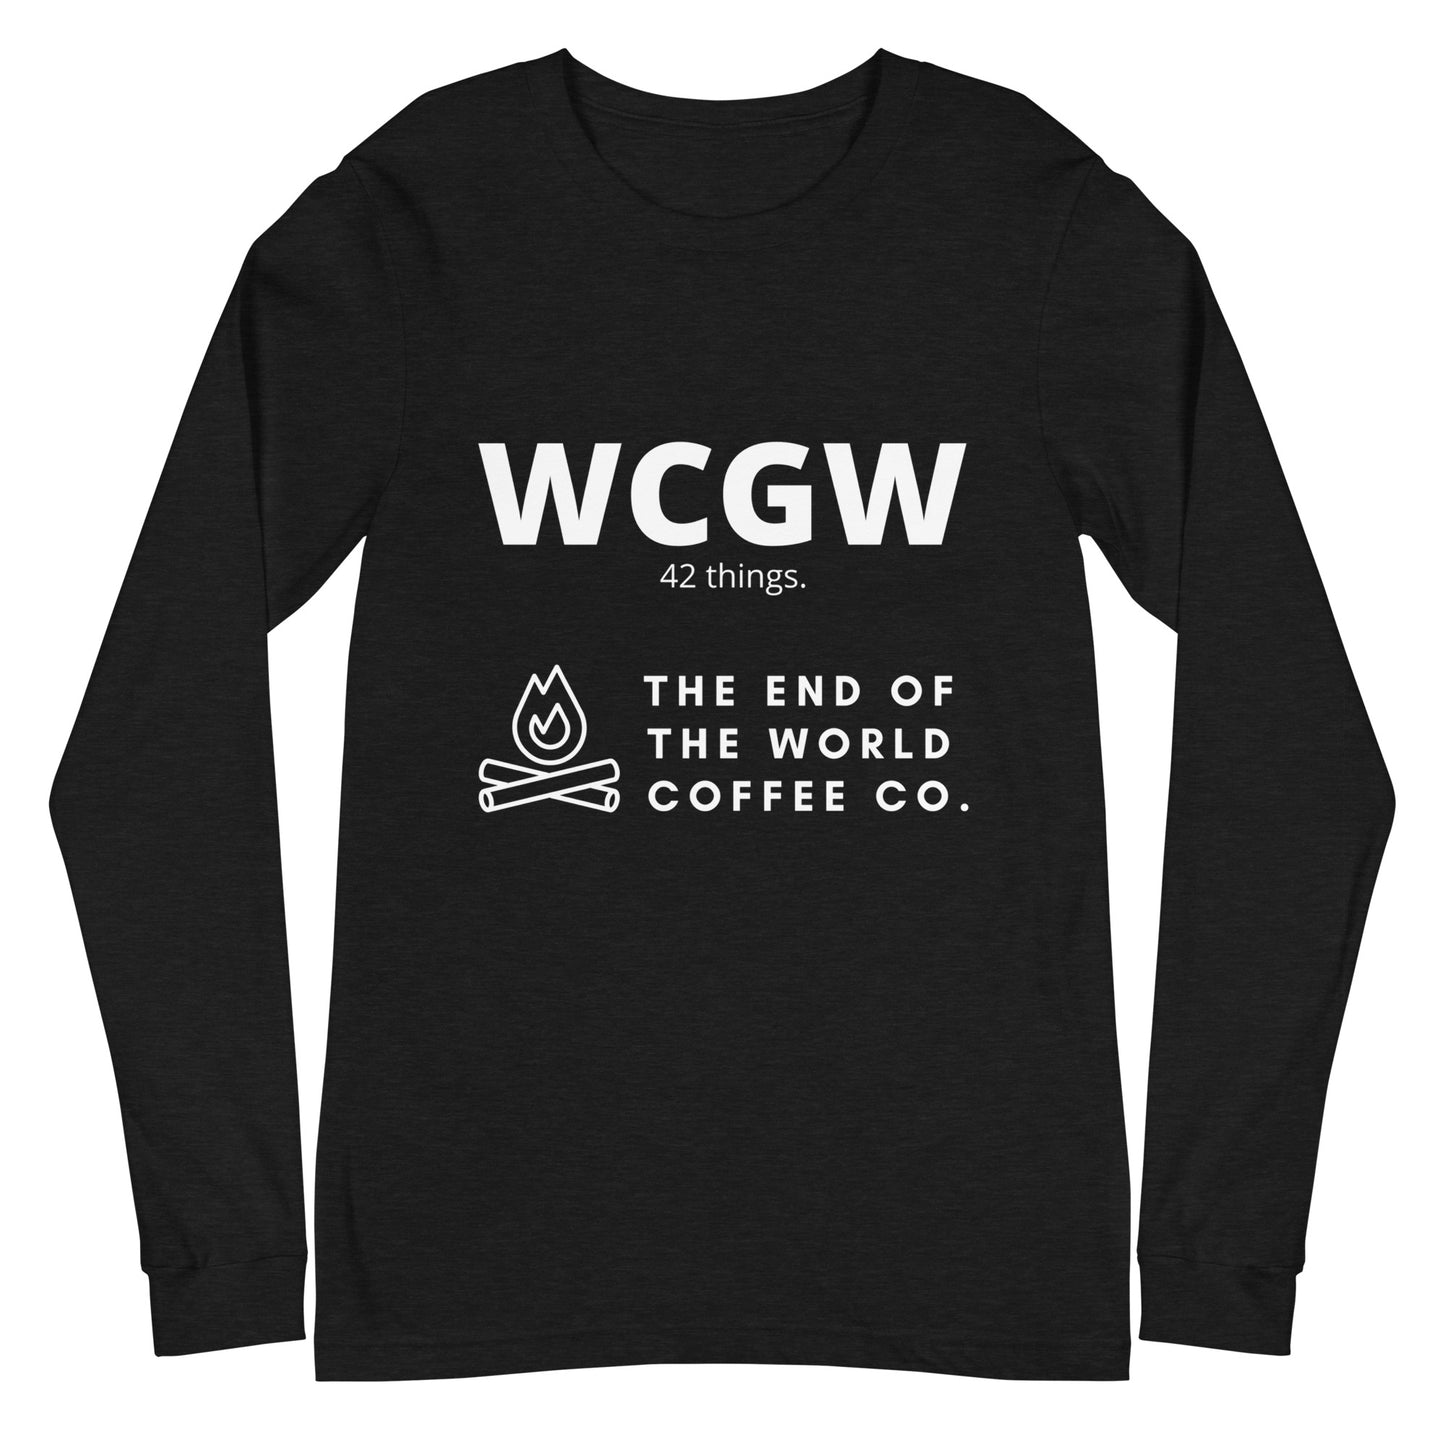 What Could Go Wrong long sleeve shirt